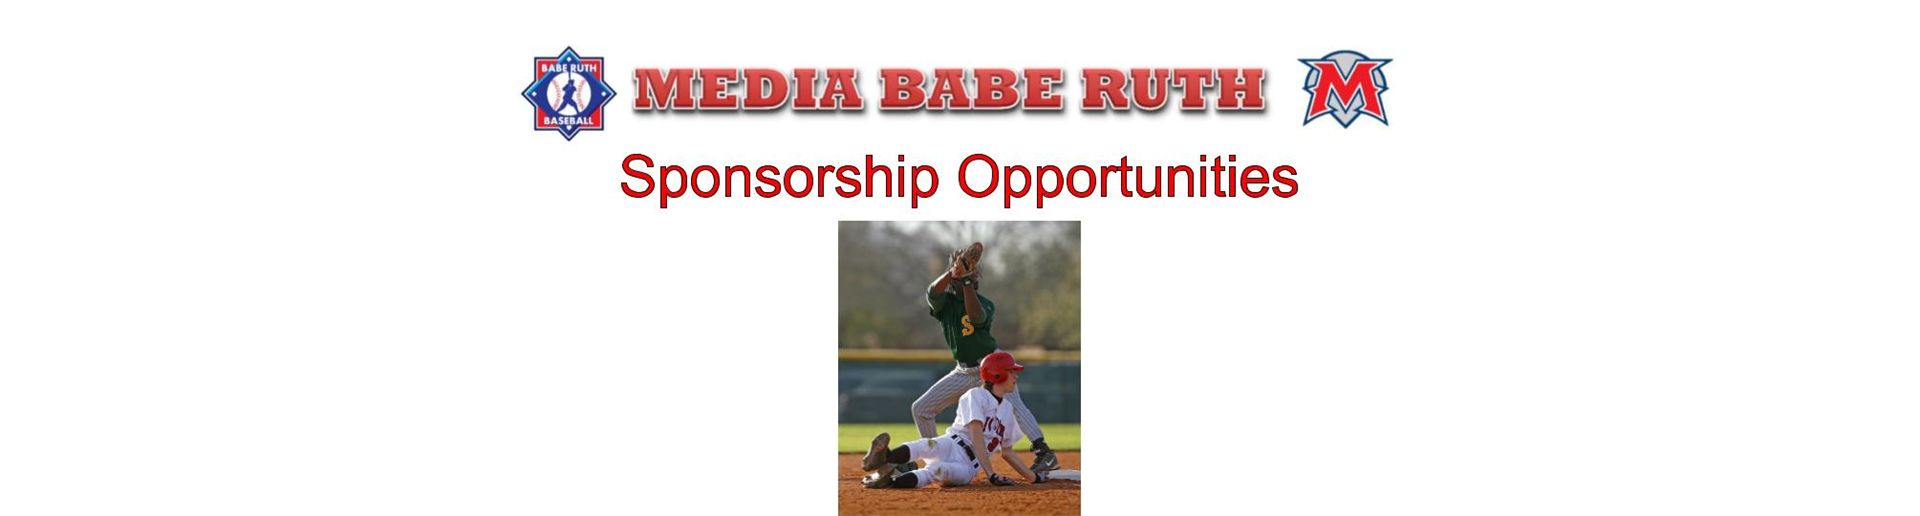 Become a Sponsor for Media Babe Ruth!